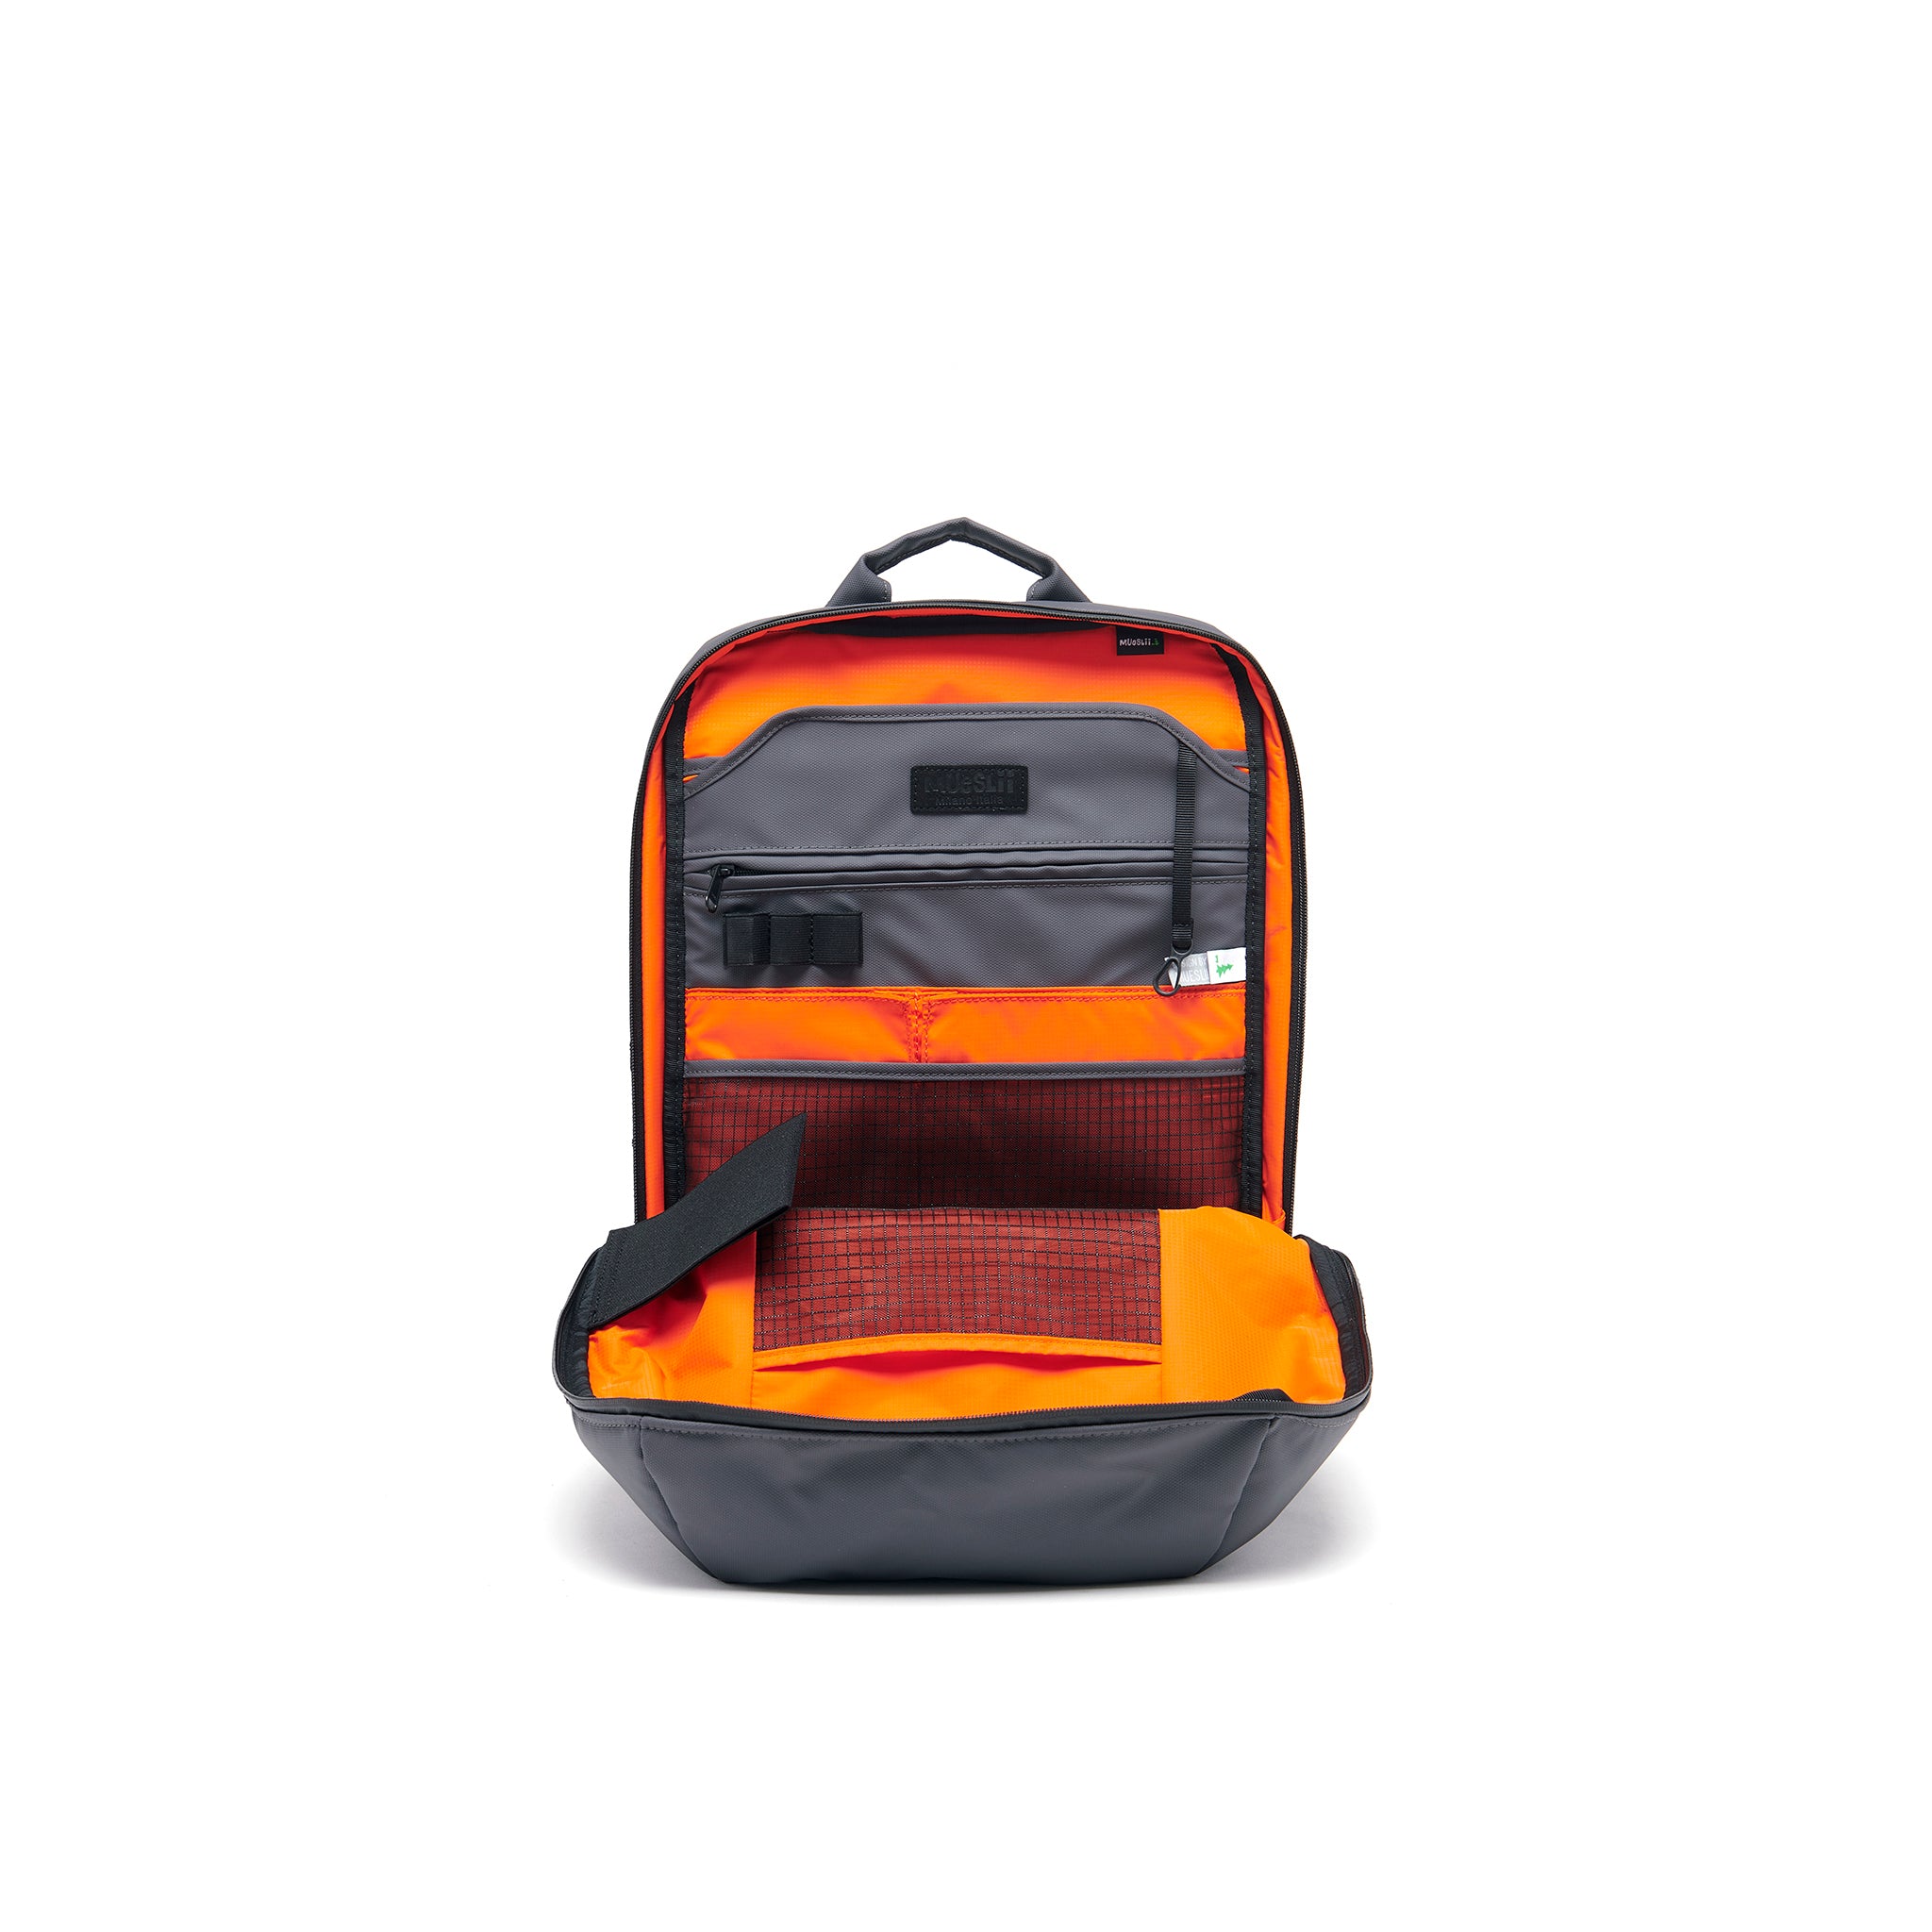 Mueslii daily backpack, made of PU coated waterproof nylon, with a laptop compartment, color grey, inside view.